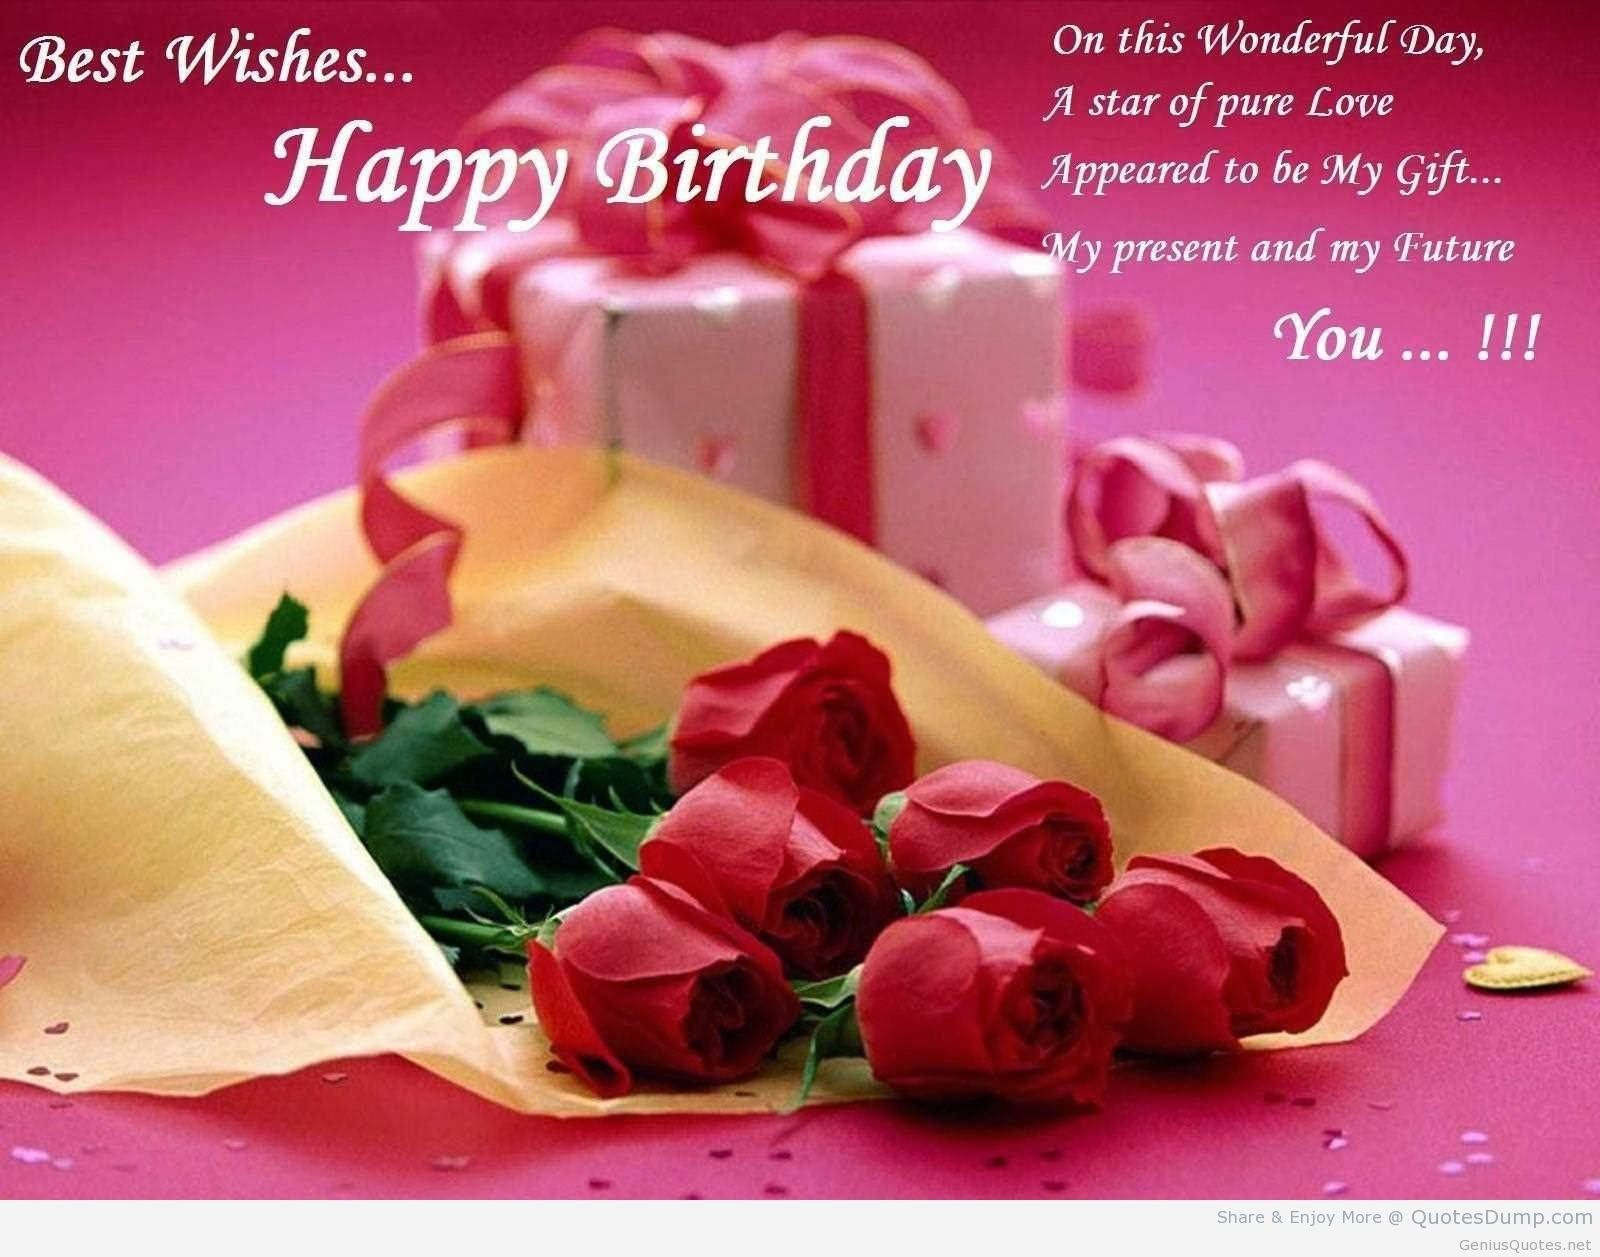 Beautiful Birthday Quotes
 The 50 Best Happy Birthday Quotes of All Time